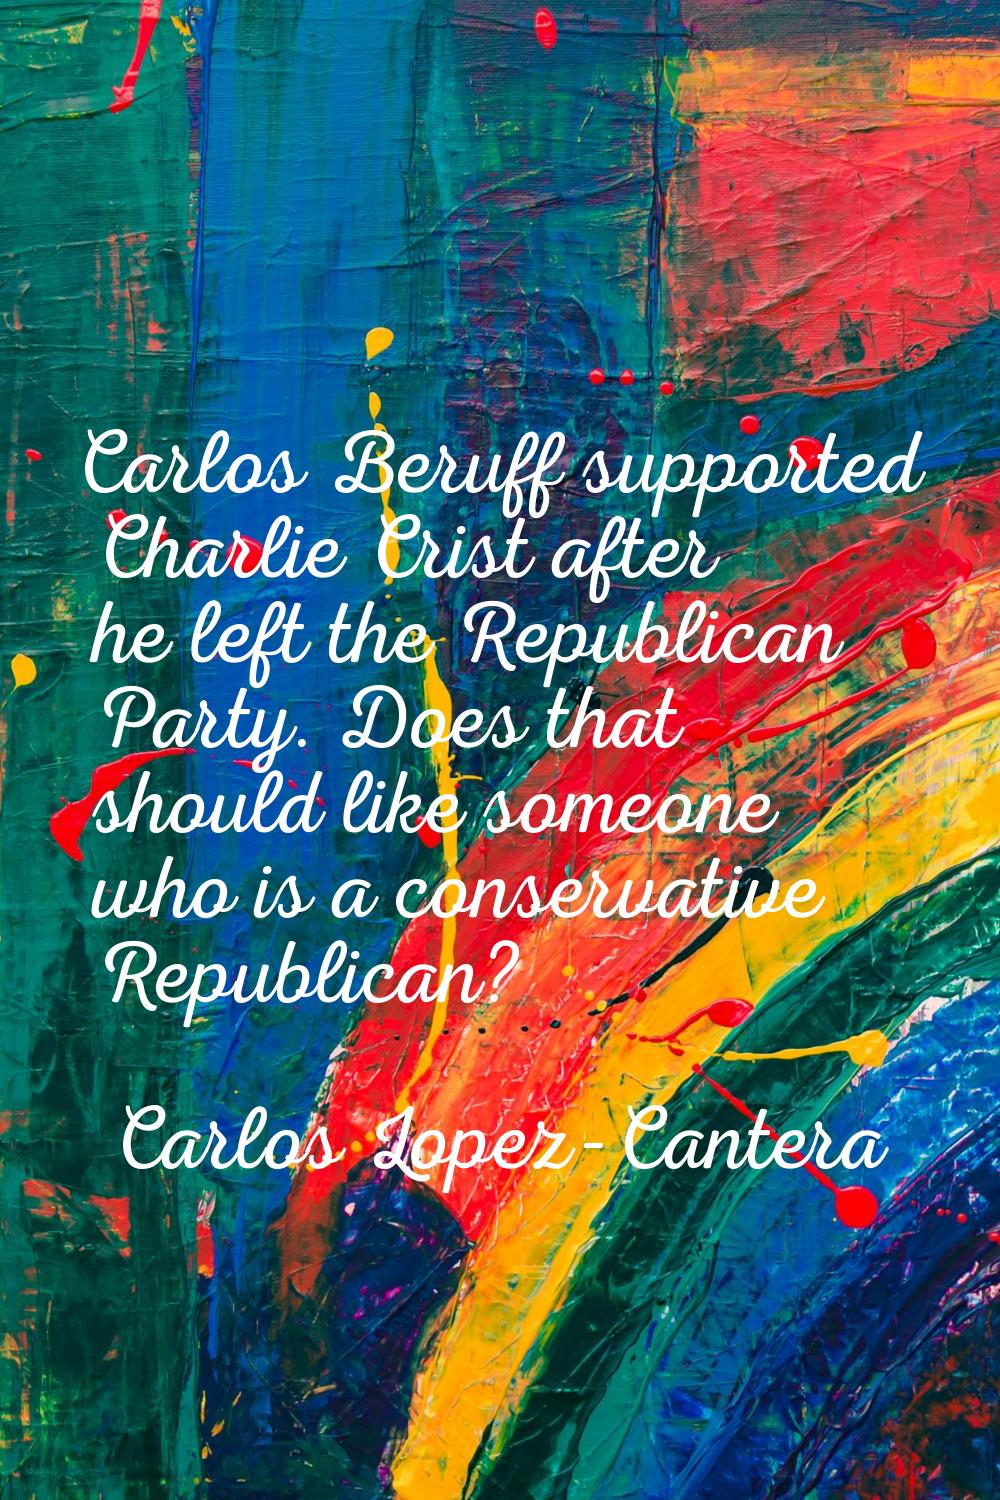 Carlos Beruff supported Charlie Crist after he left the Republican Party. Does that should like som